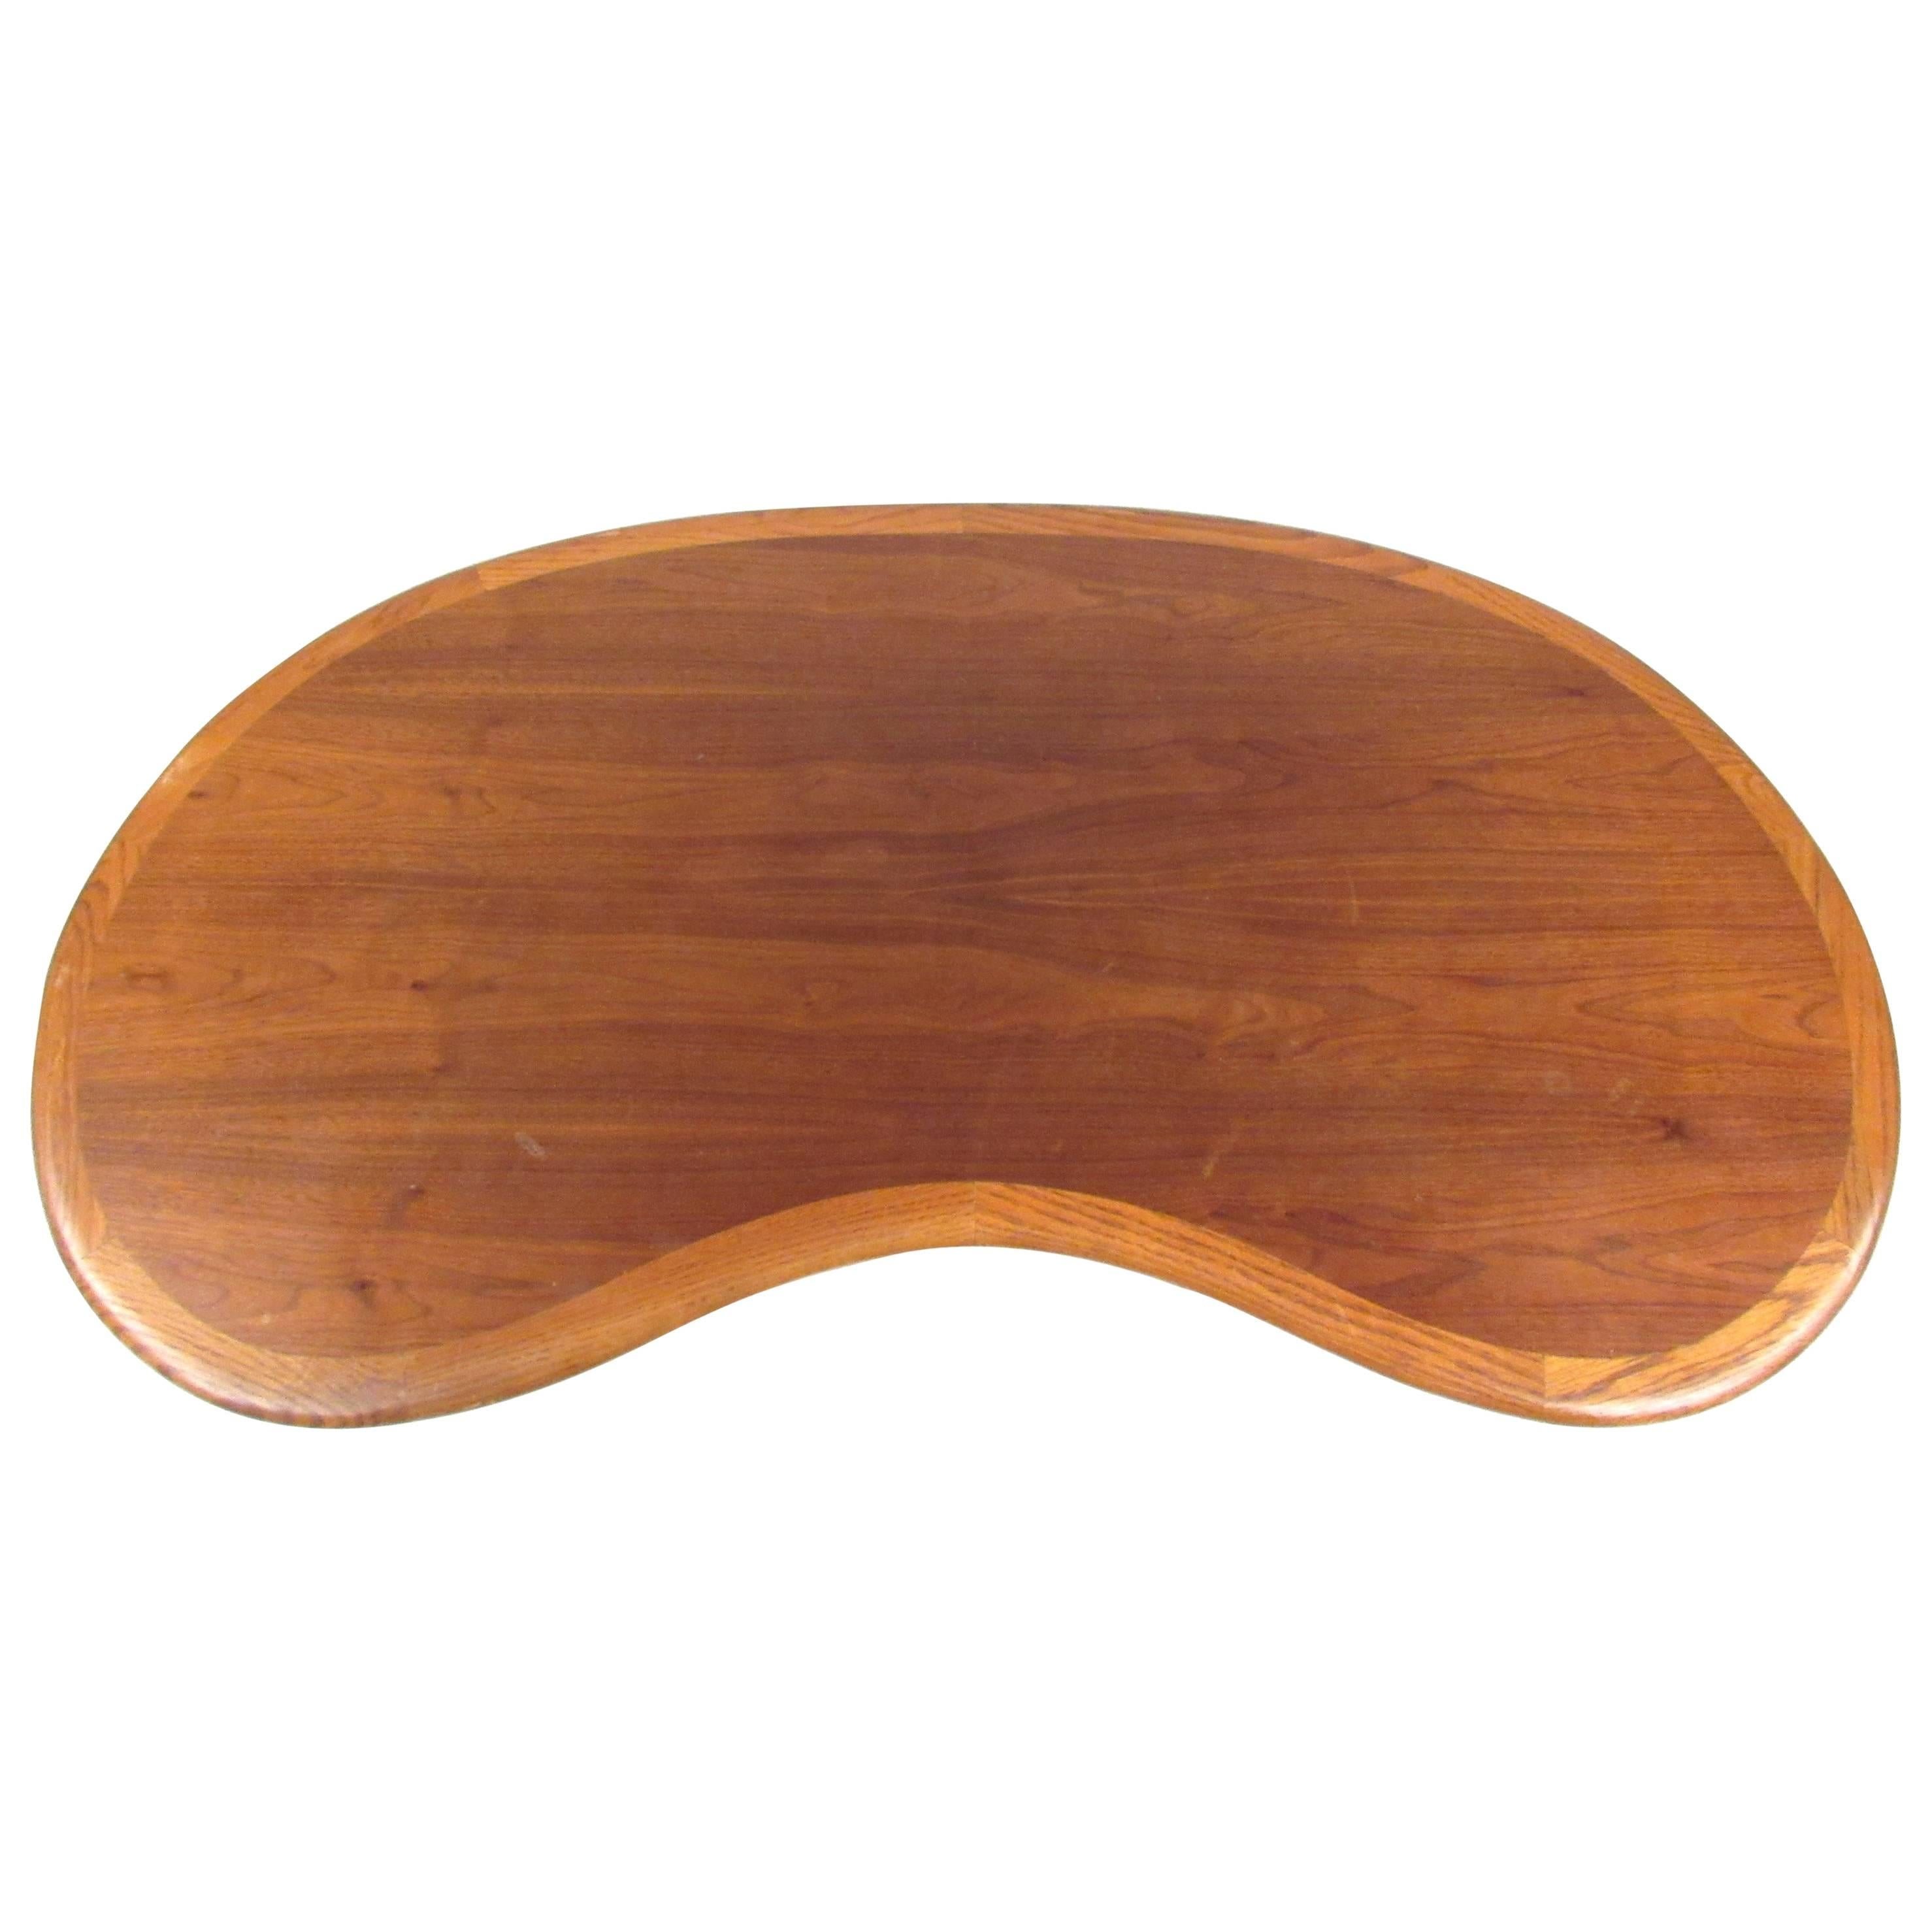 Classic kidney-shaped walnut coffee table by Lane featuring x-shaped base and banded lighter oak trim at the perimeter.